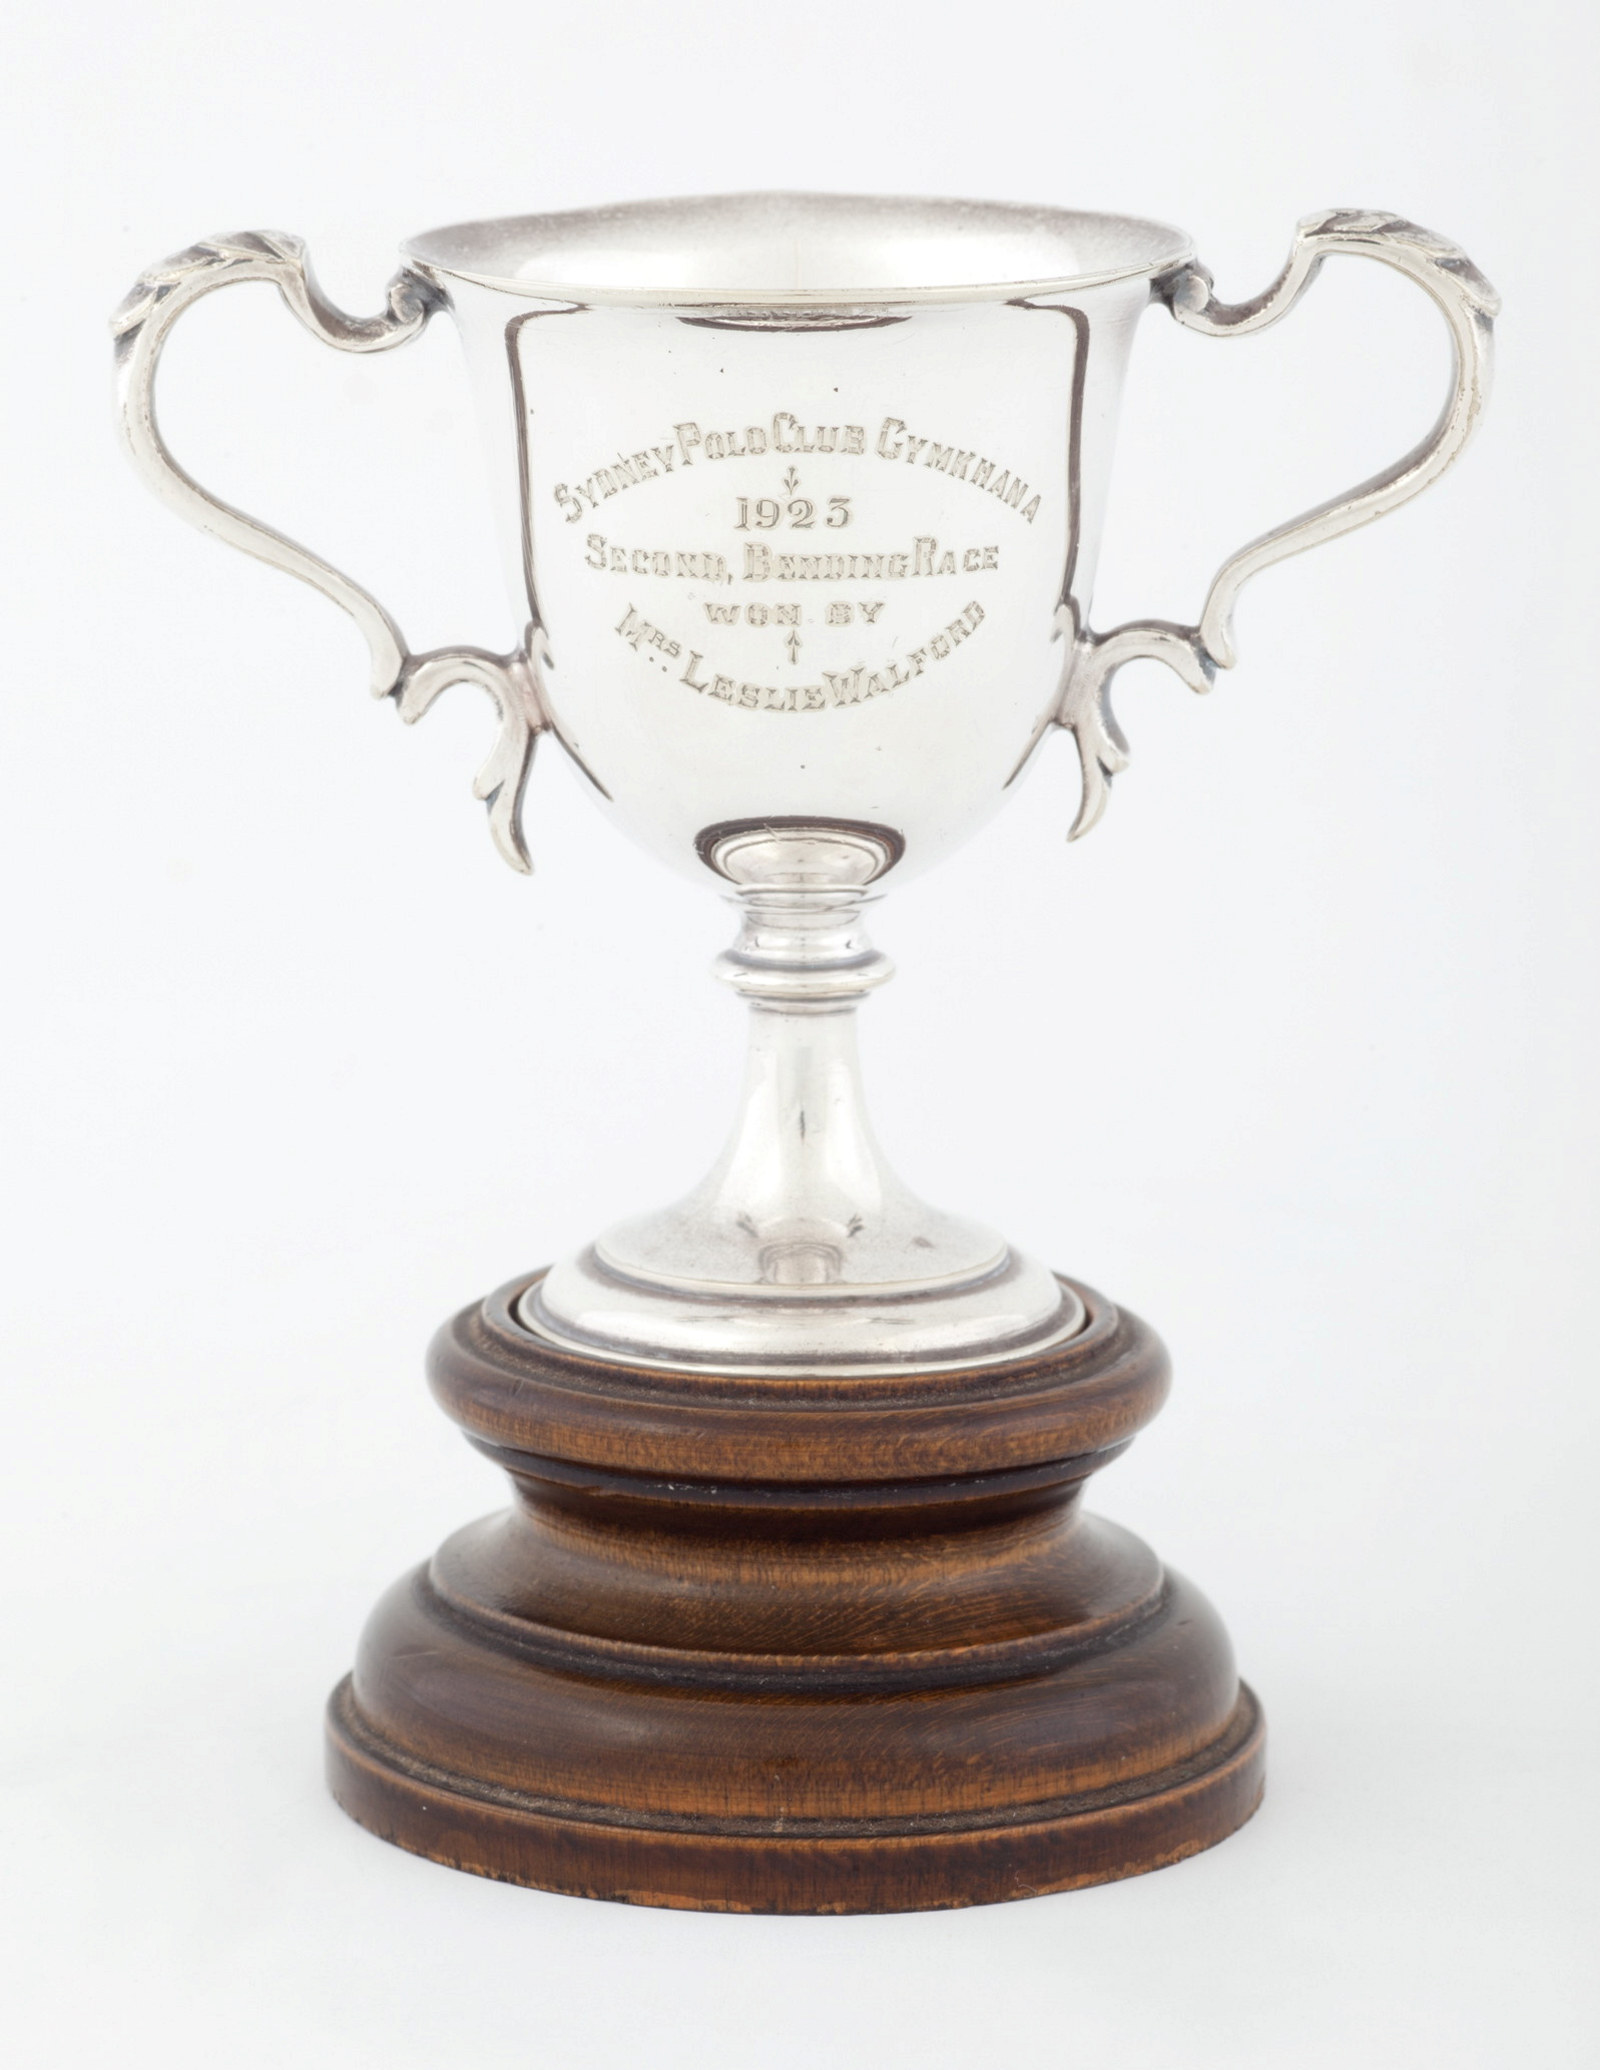 Trophy presented to Dora Walford